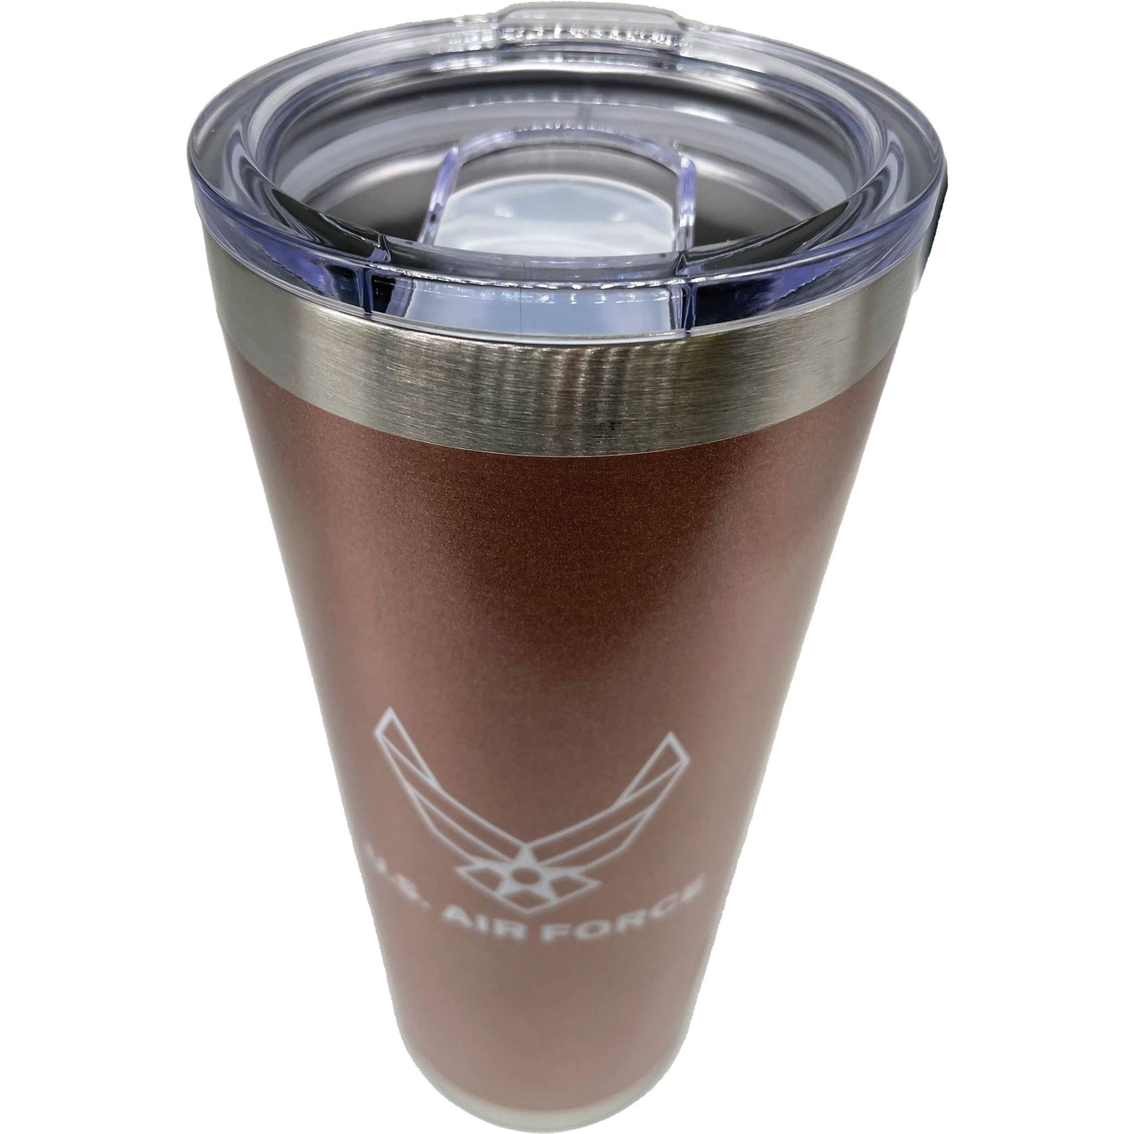 Uniformed Air Force Sky's the Limit 22 oz. Tall Mug - Image 3 of 5